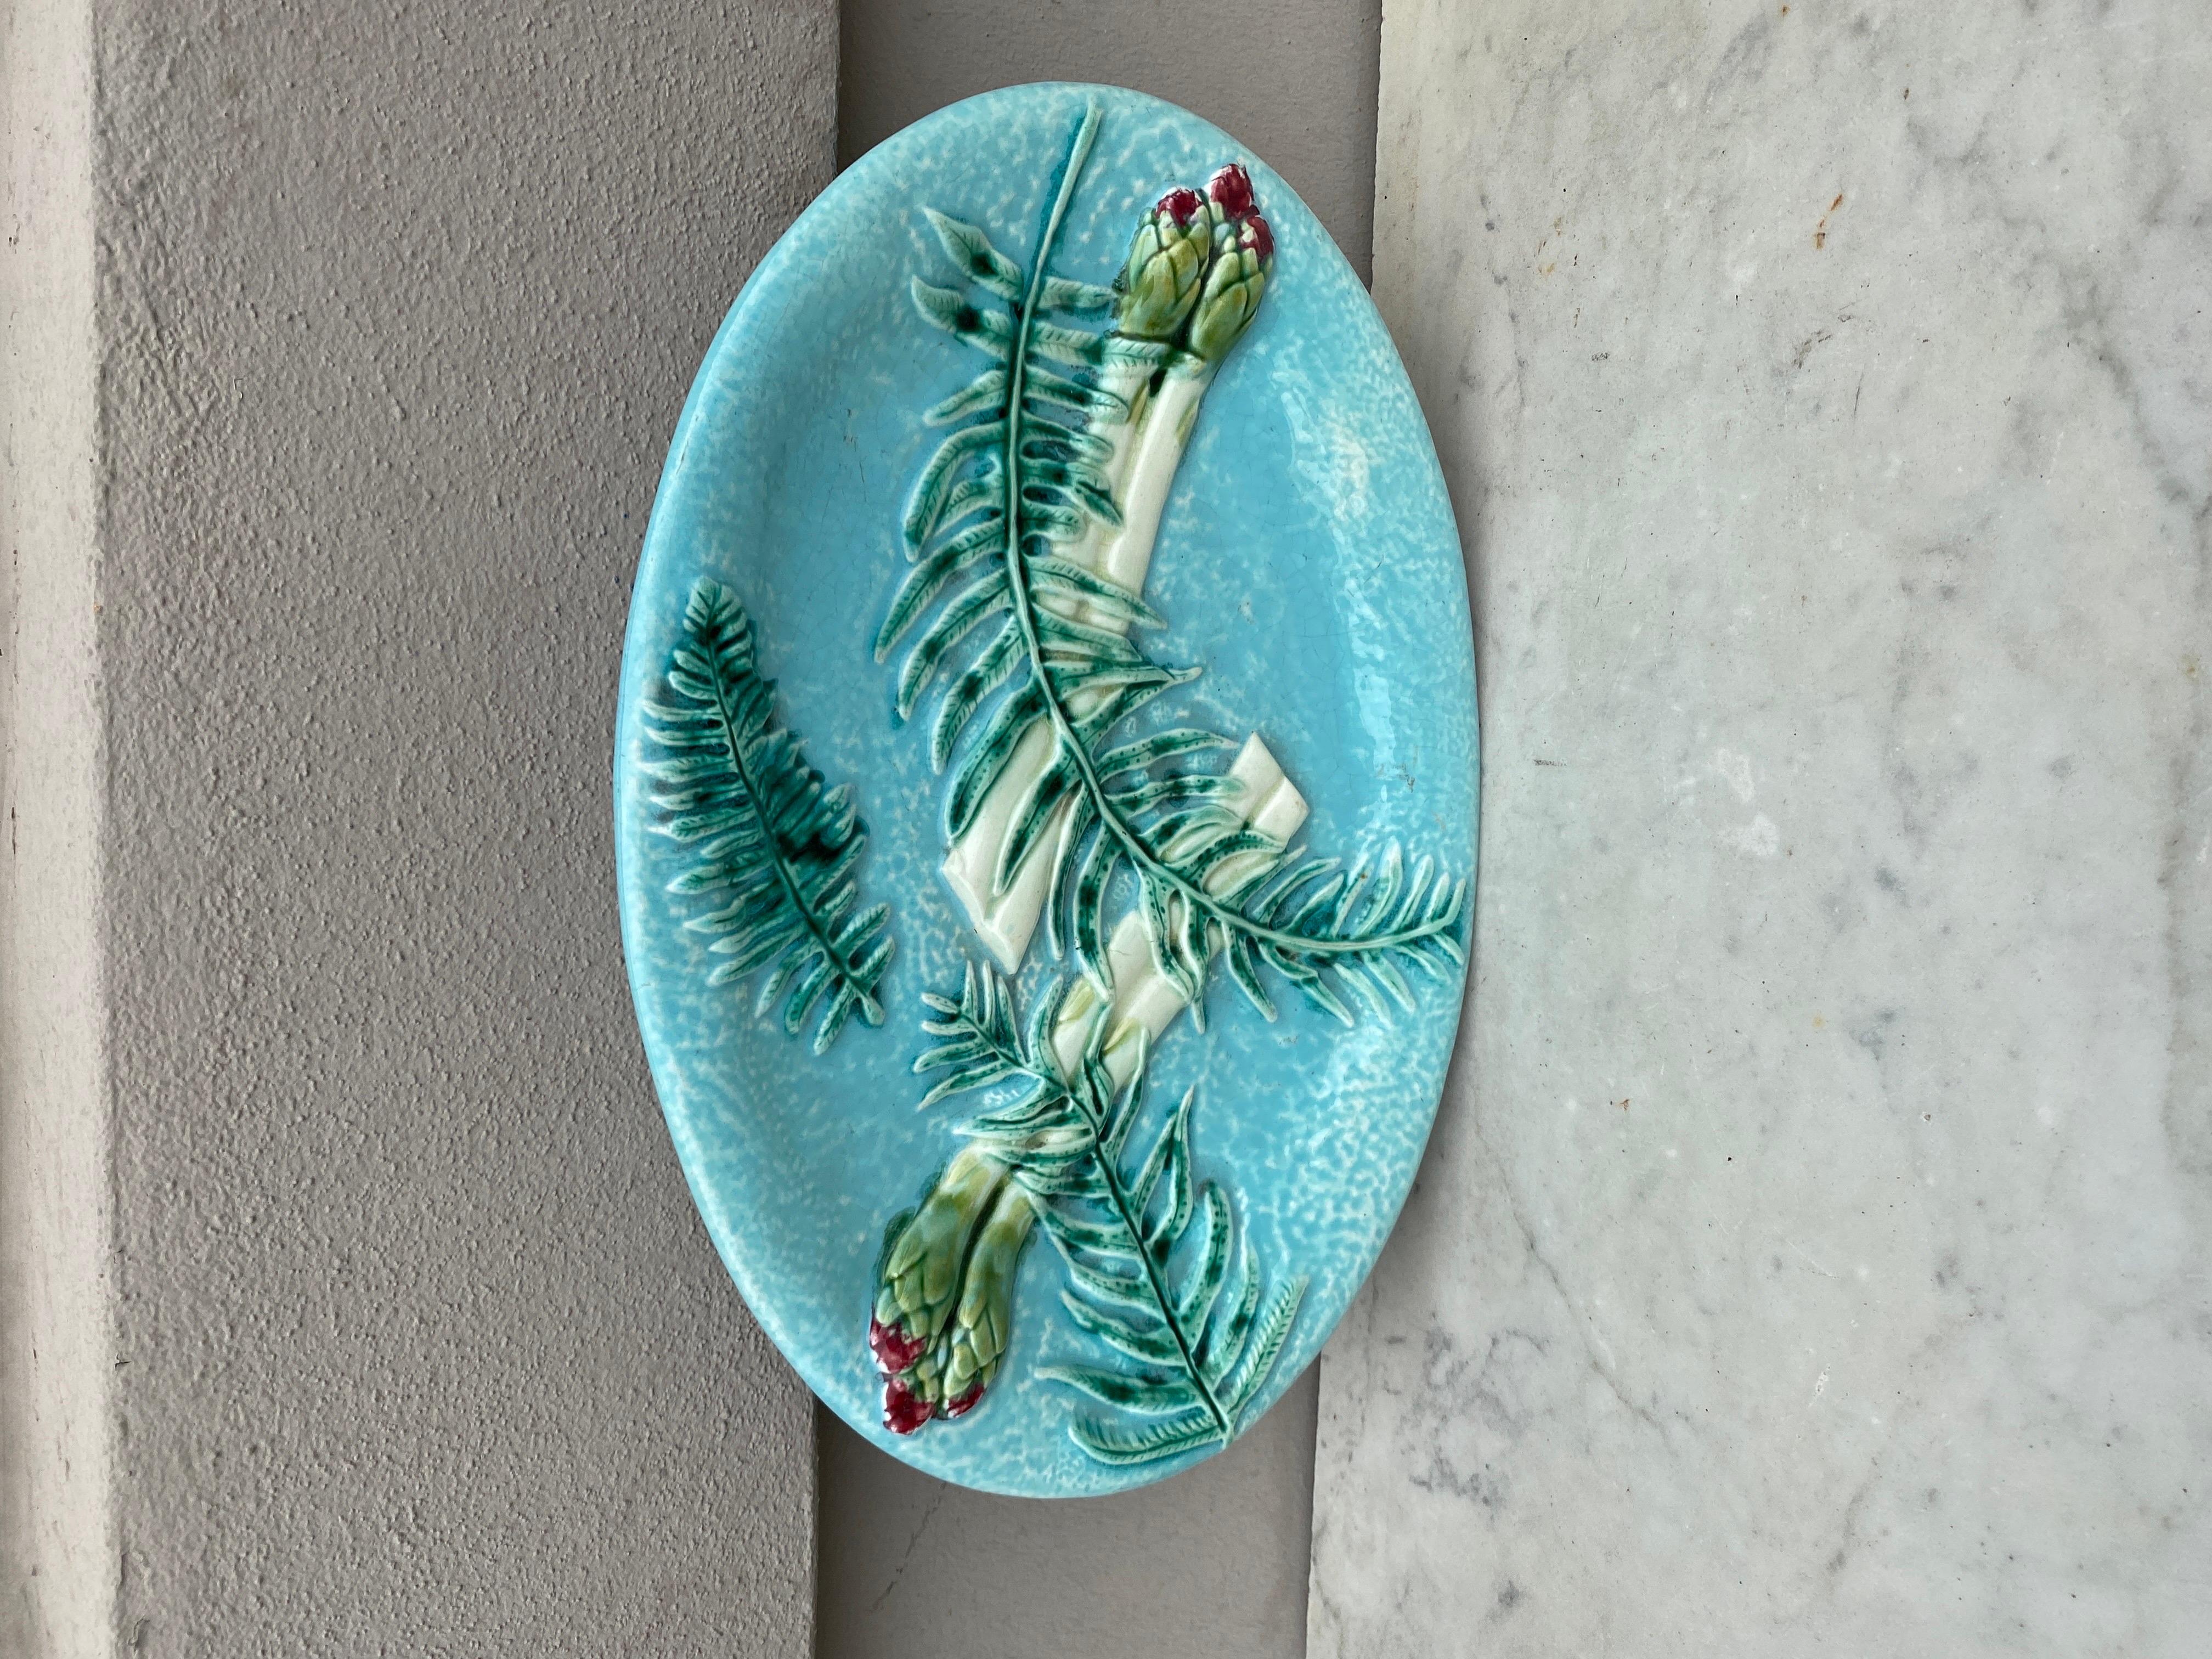 Rare Majolica Asparagus Platter with Fern Clairefontaine, circa 1880 For Sale 12